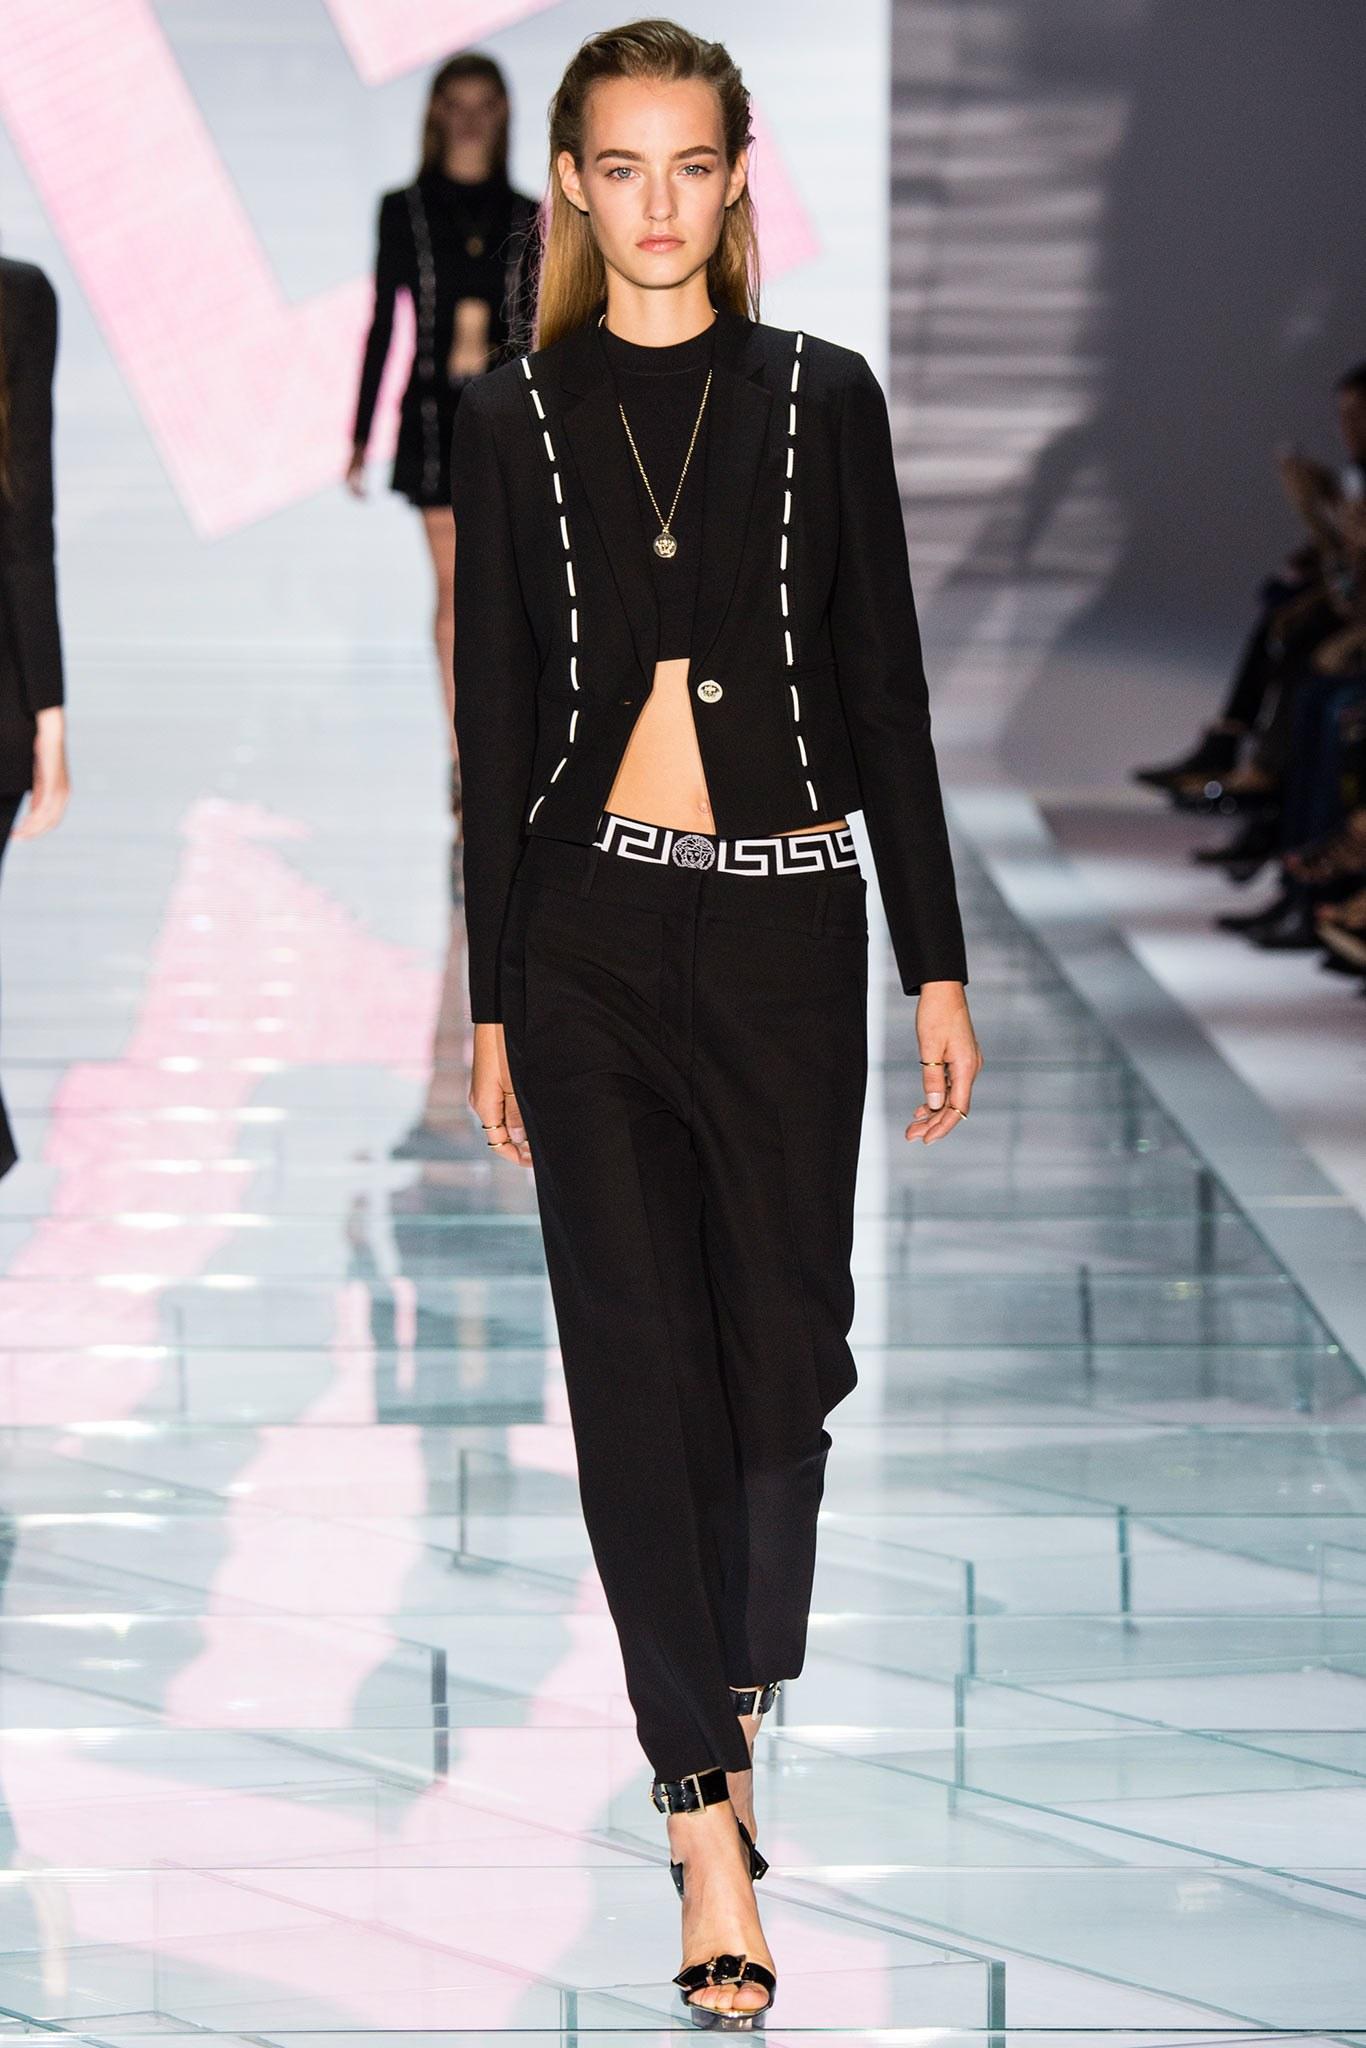 S/S 2015 Look # 1 VERSACE BLACK SILK KNITTED STRETCHY CROP TOP 38 - 2 In New Condition For Sale In Montgomery, TX